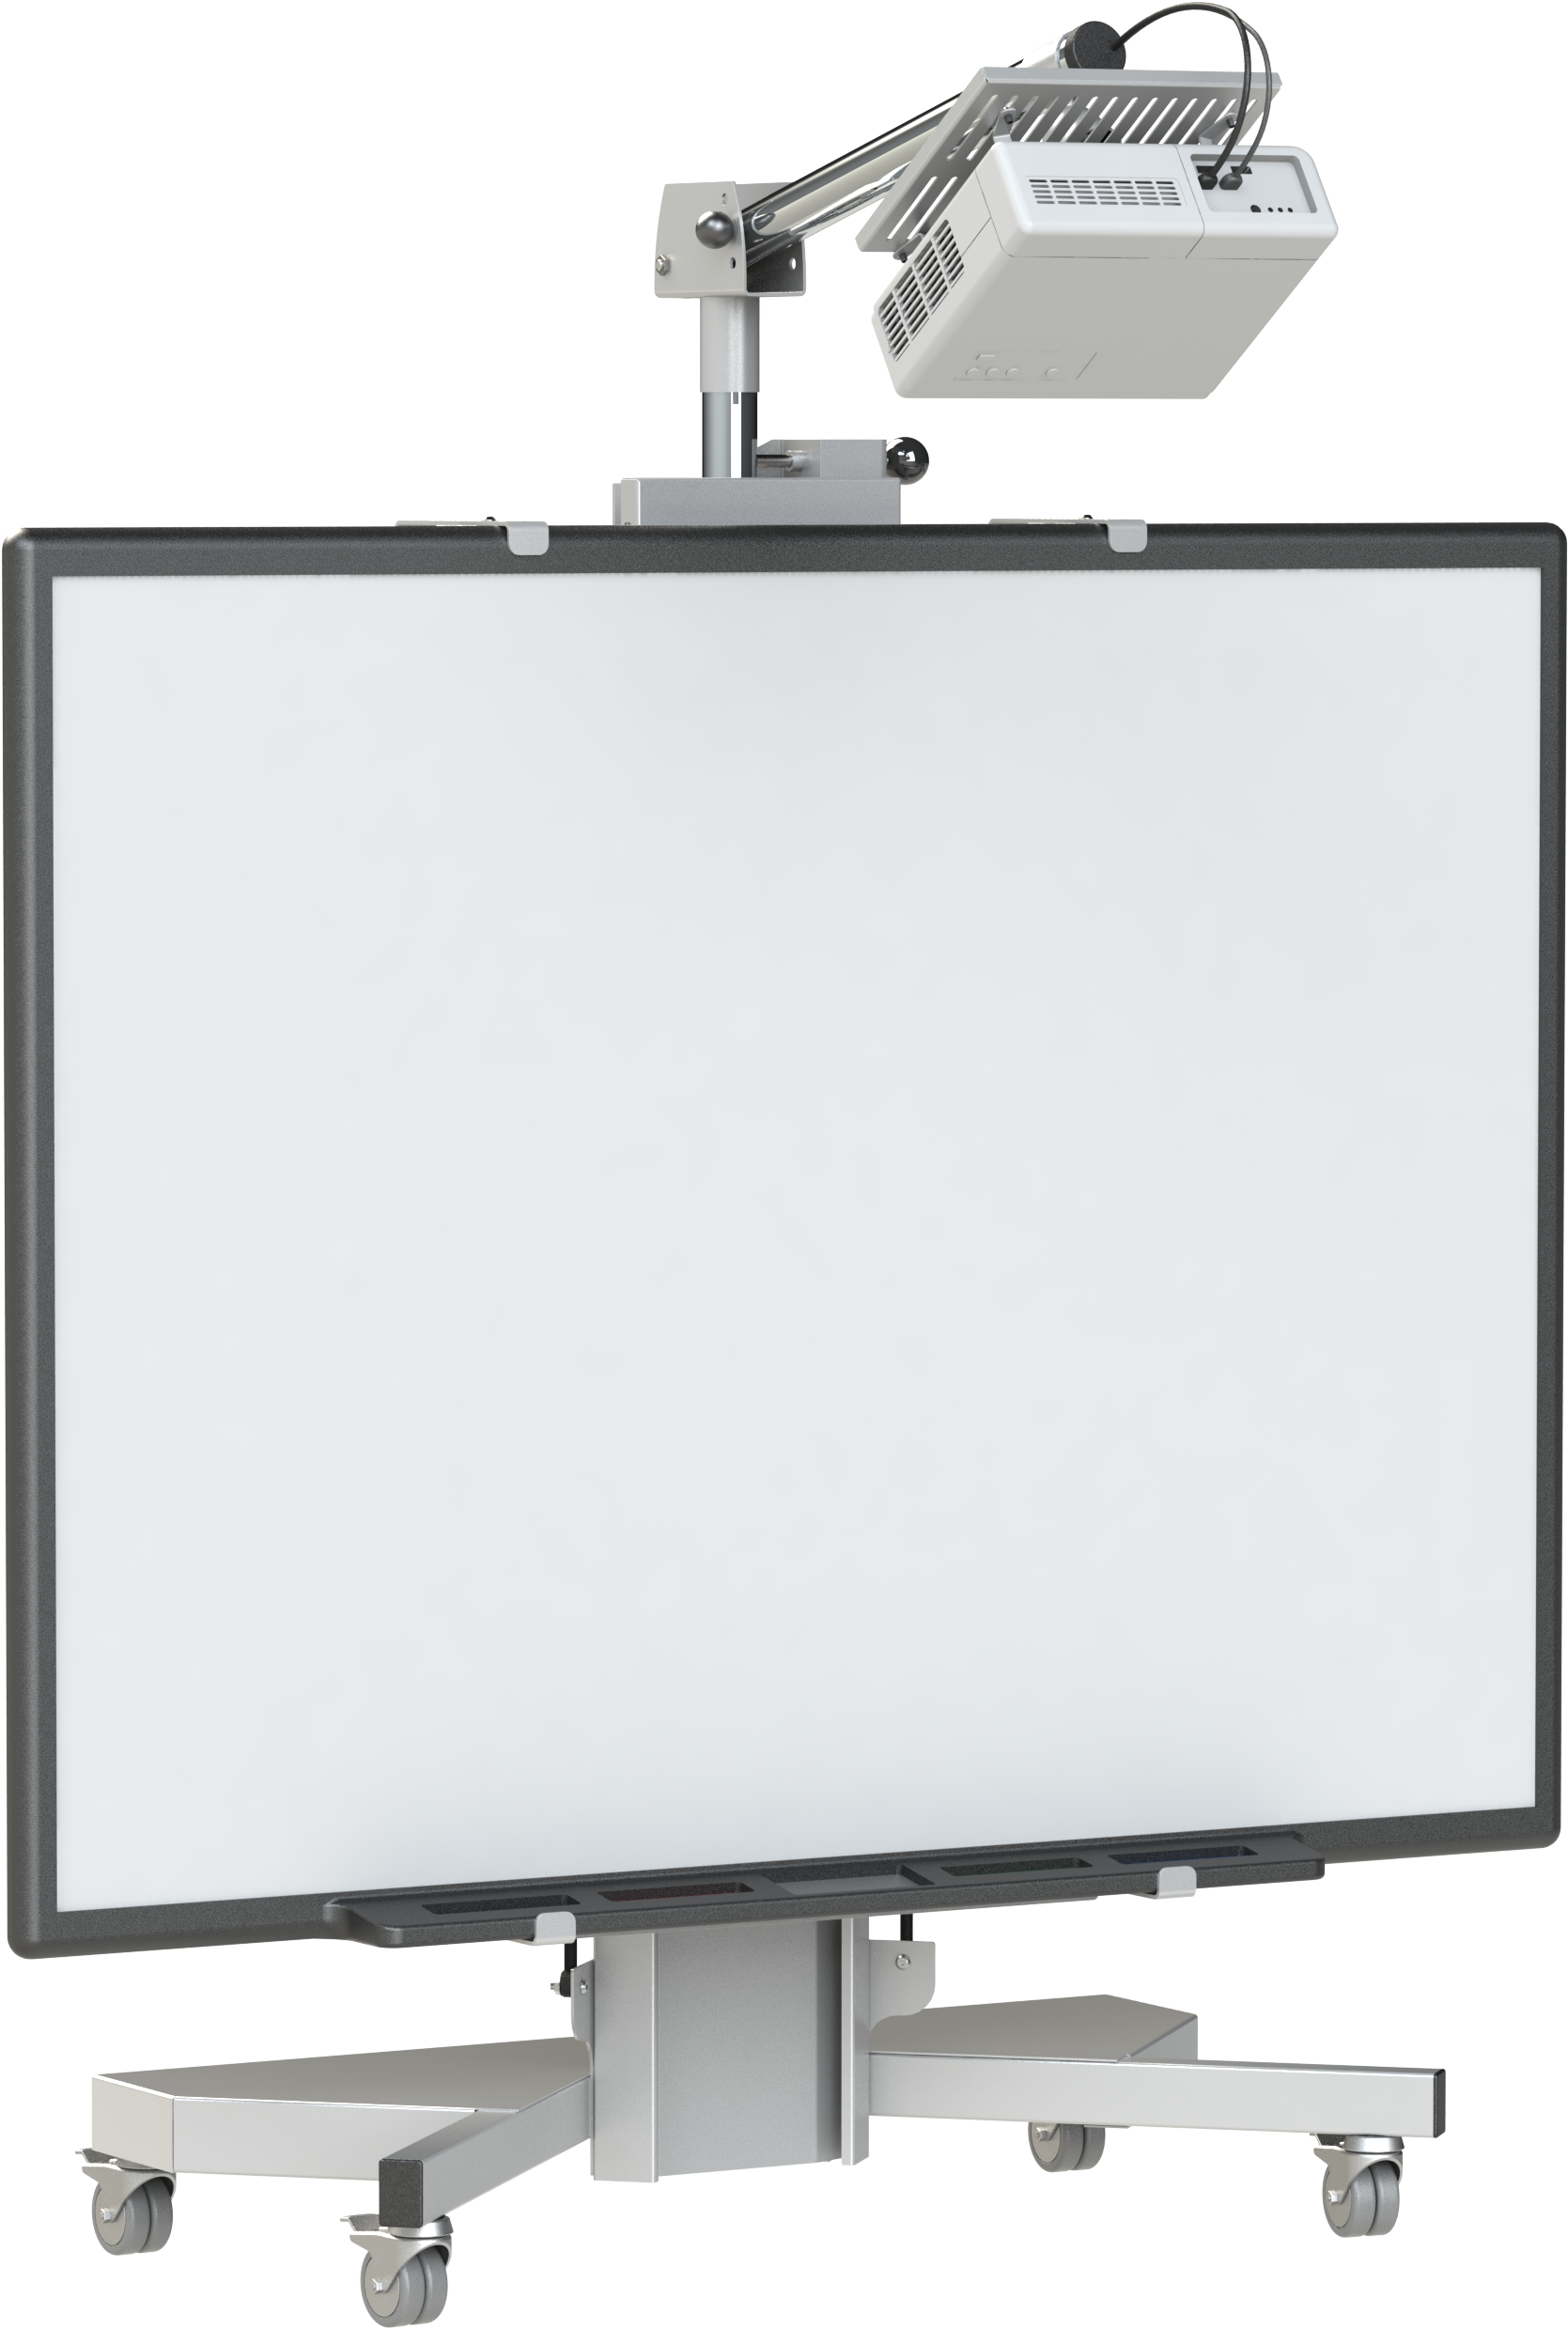 A White Board With A Black Frame